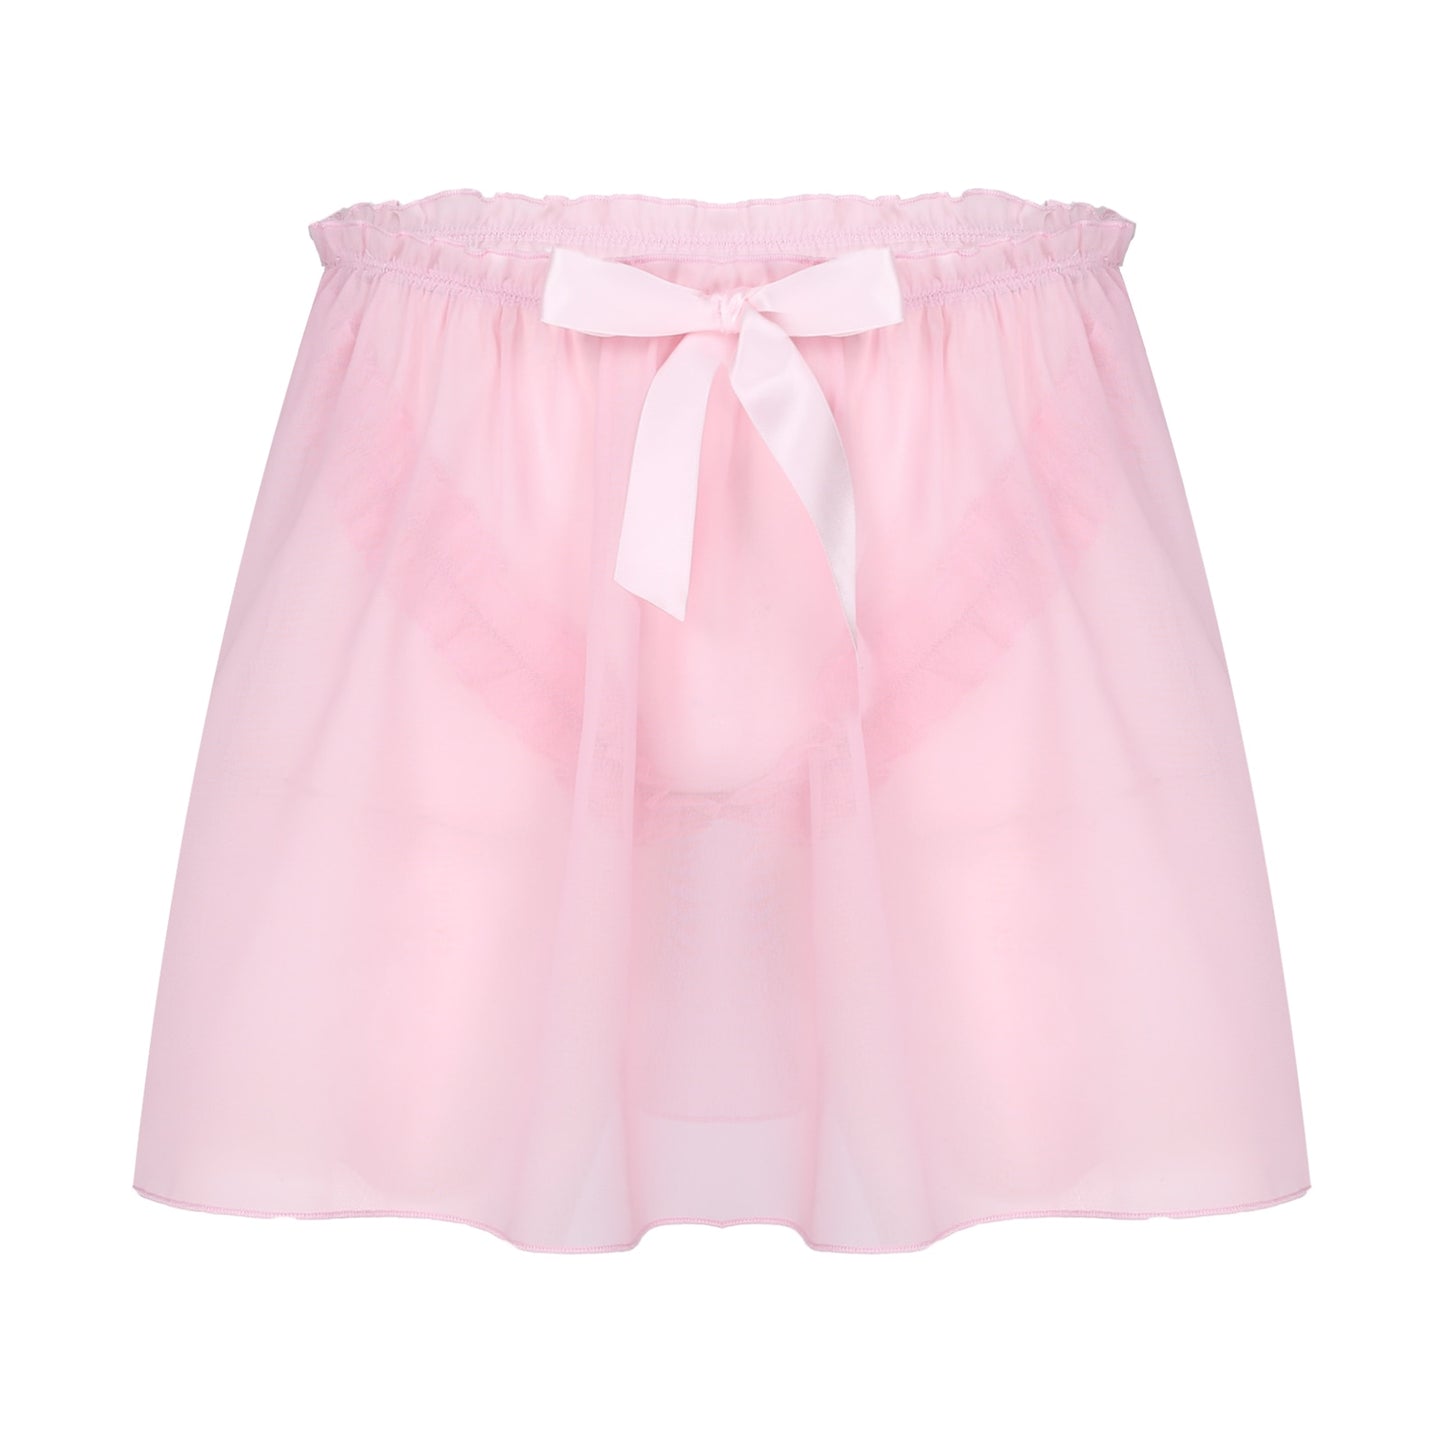 Semi-see Through Pink Bowknot Frilly Mini Skirt – ABDL Diapers